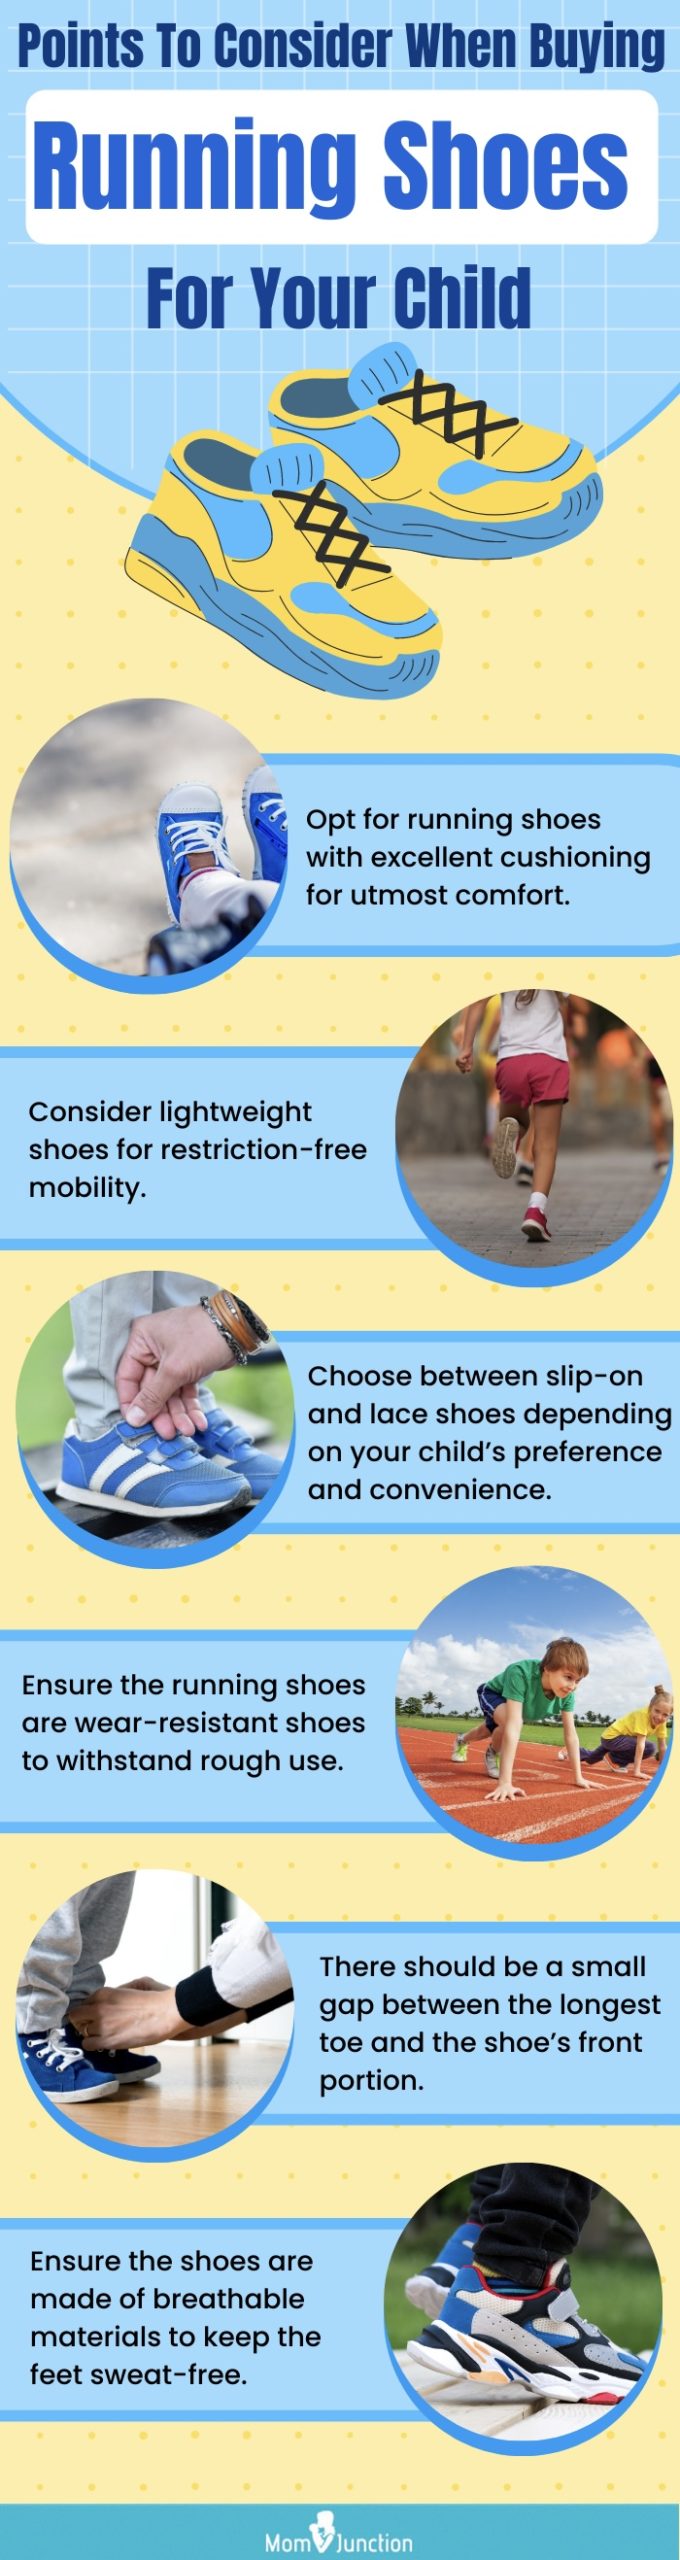 Points To Consider When Buying Running Shoes For Your Child (infographic)